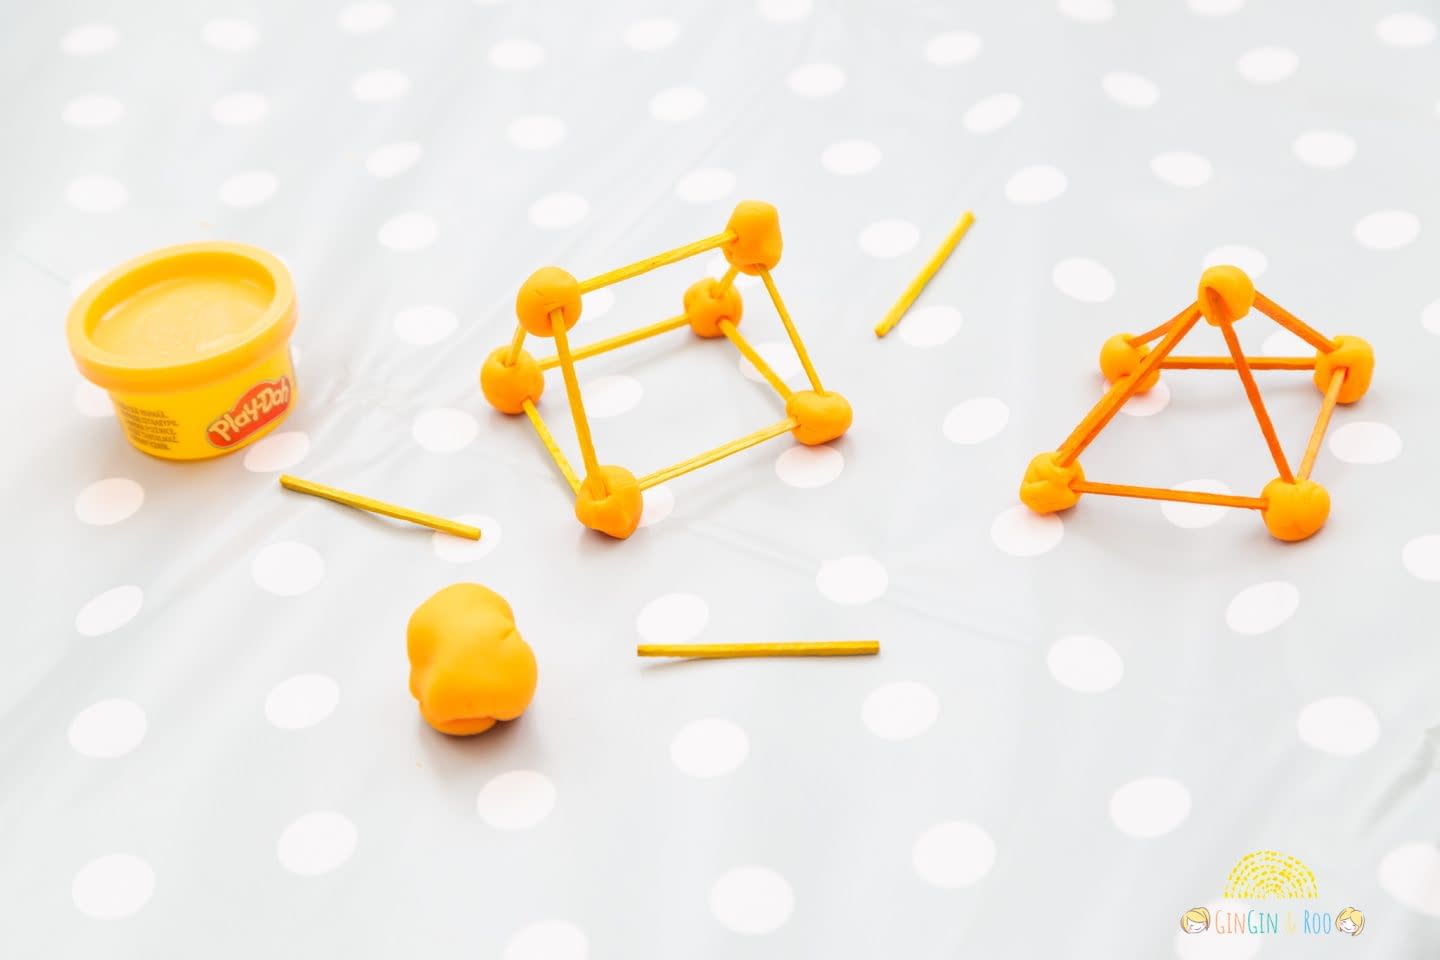 Making Matchstick Shapes by GinGin & Roo
#toddleractivity #toddlereducation #toddlerlearn